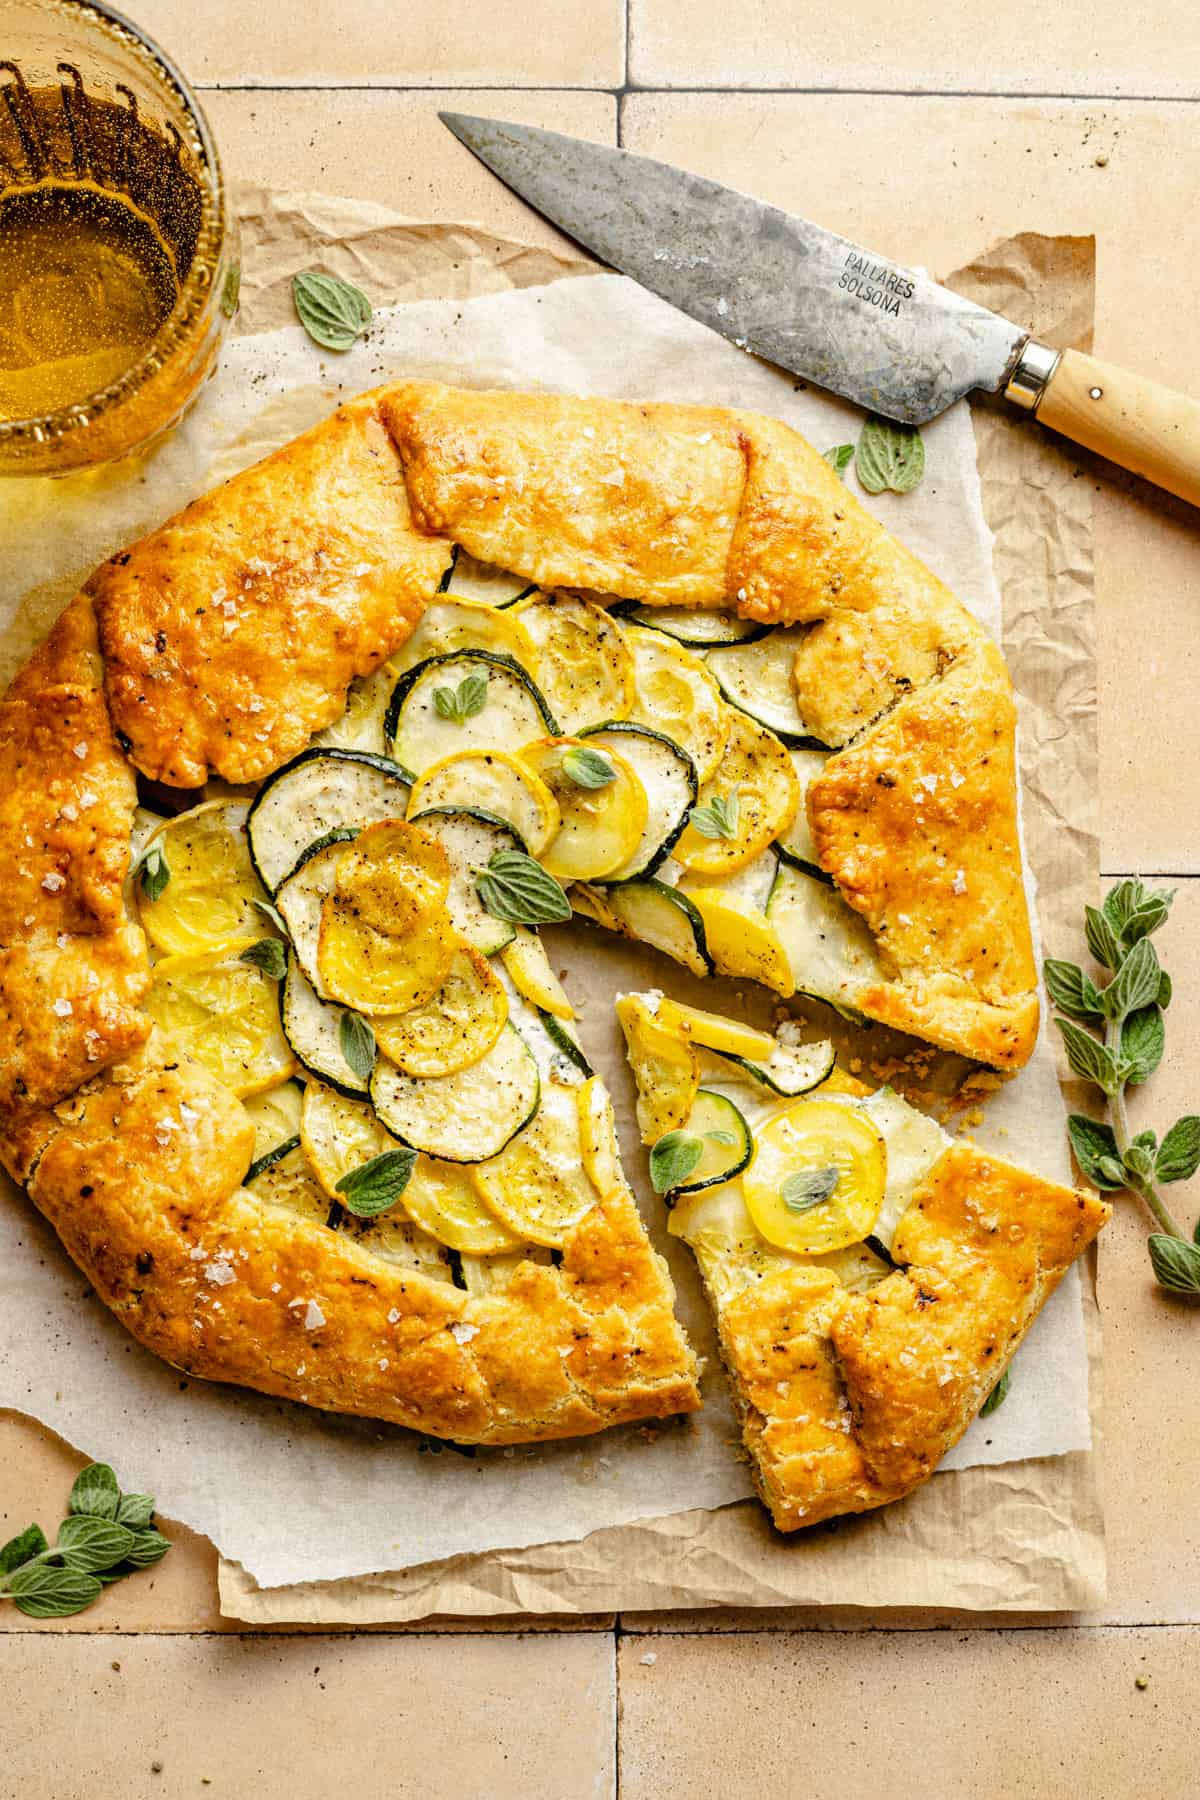 The zucchini galette with a wedge cut, knife to the side with herbs and a drink too.